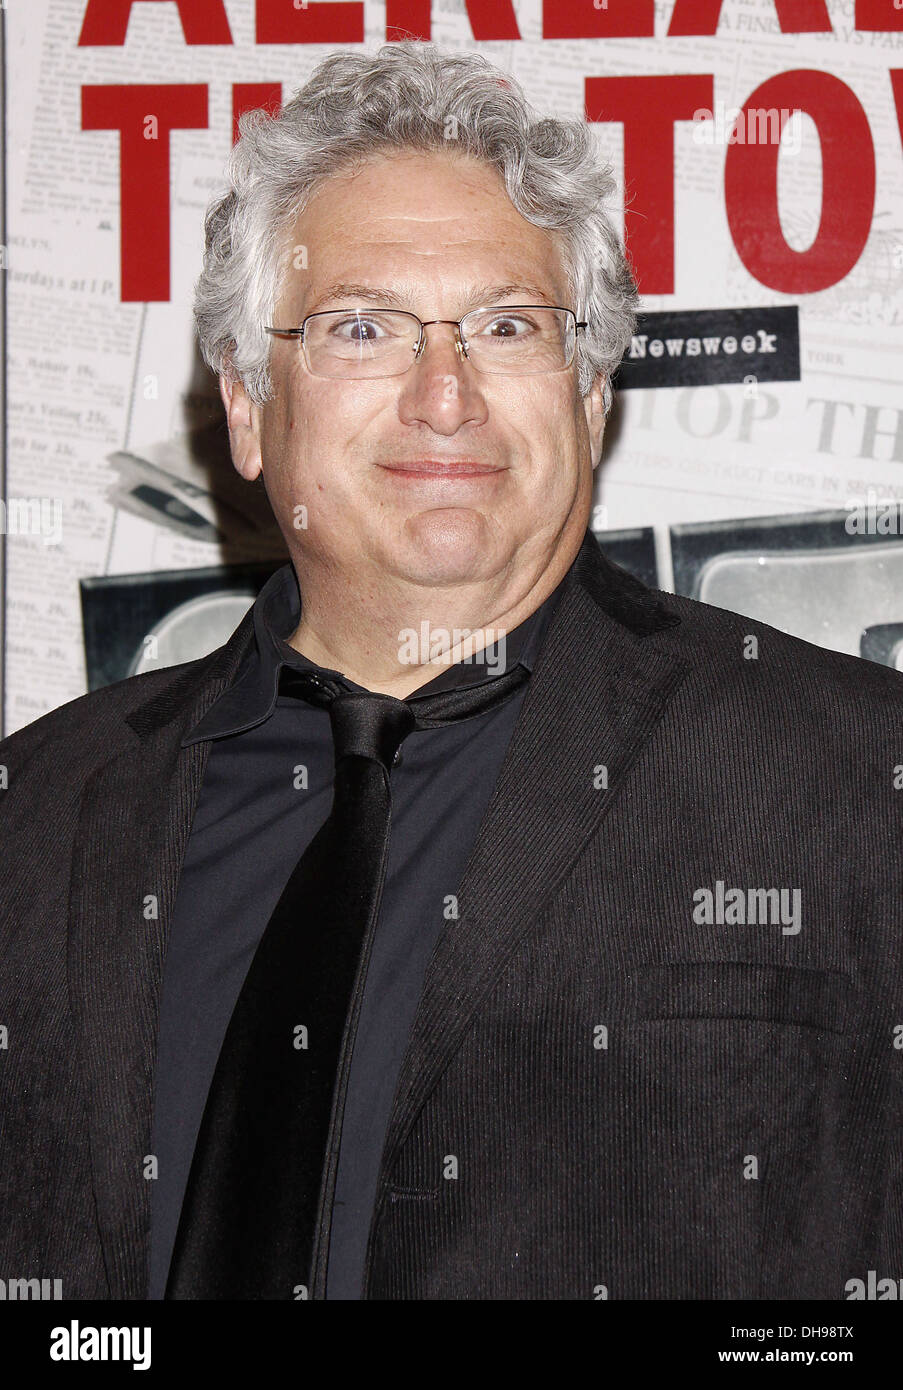 Harvey Fierstein Broadway opening night of Disney Theatrical Productions musical 'Newsies' at Nederlander Theatre - Arrivals Stock Photo